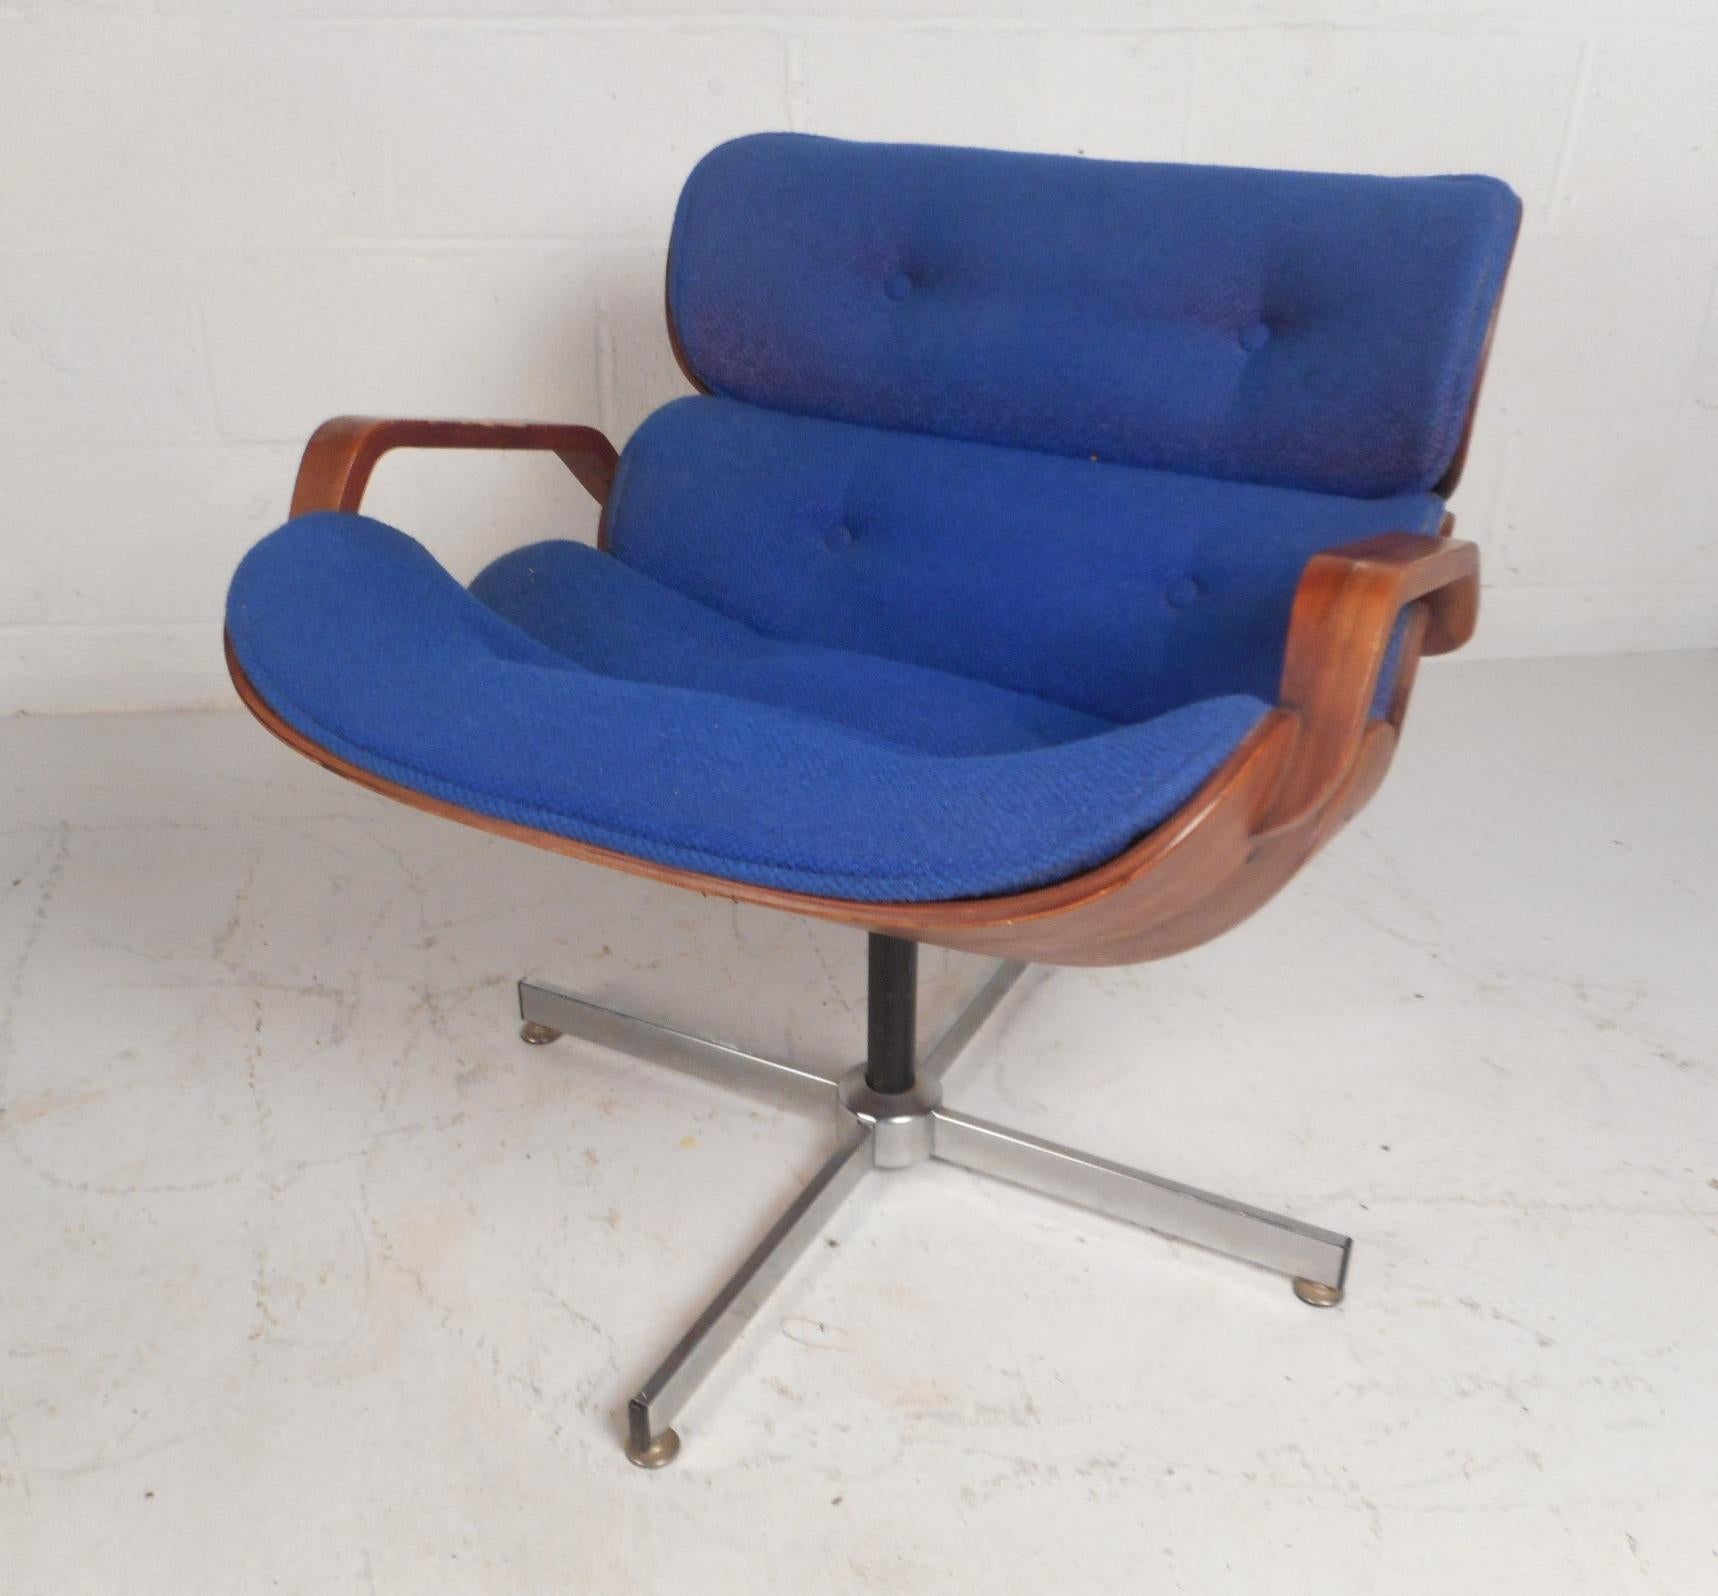 A beautiful vintage modern lounge chair that swivels and tilts ensuring maximum comfort. This unique chair features thick padded seating covered in plush blue tufted fabric. Sleek design with a hardshell walnut frame, sculpted wood arm rests, and